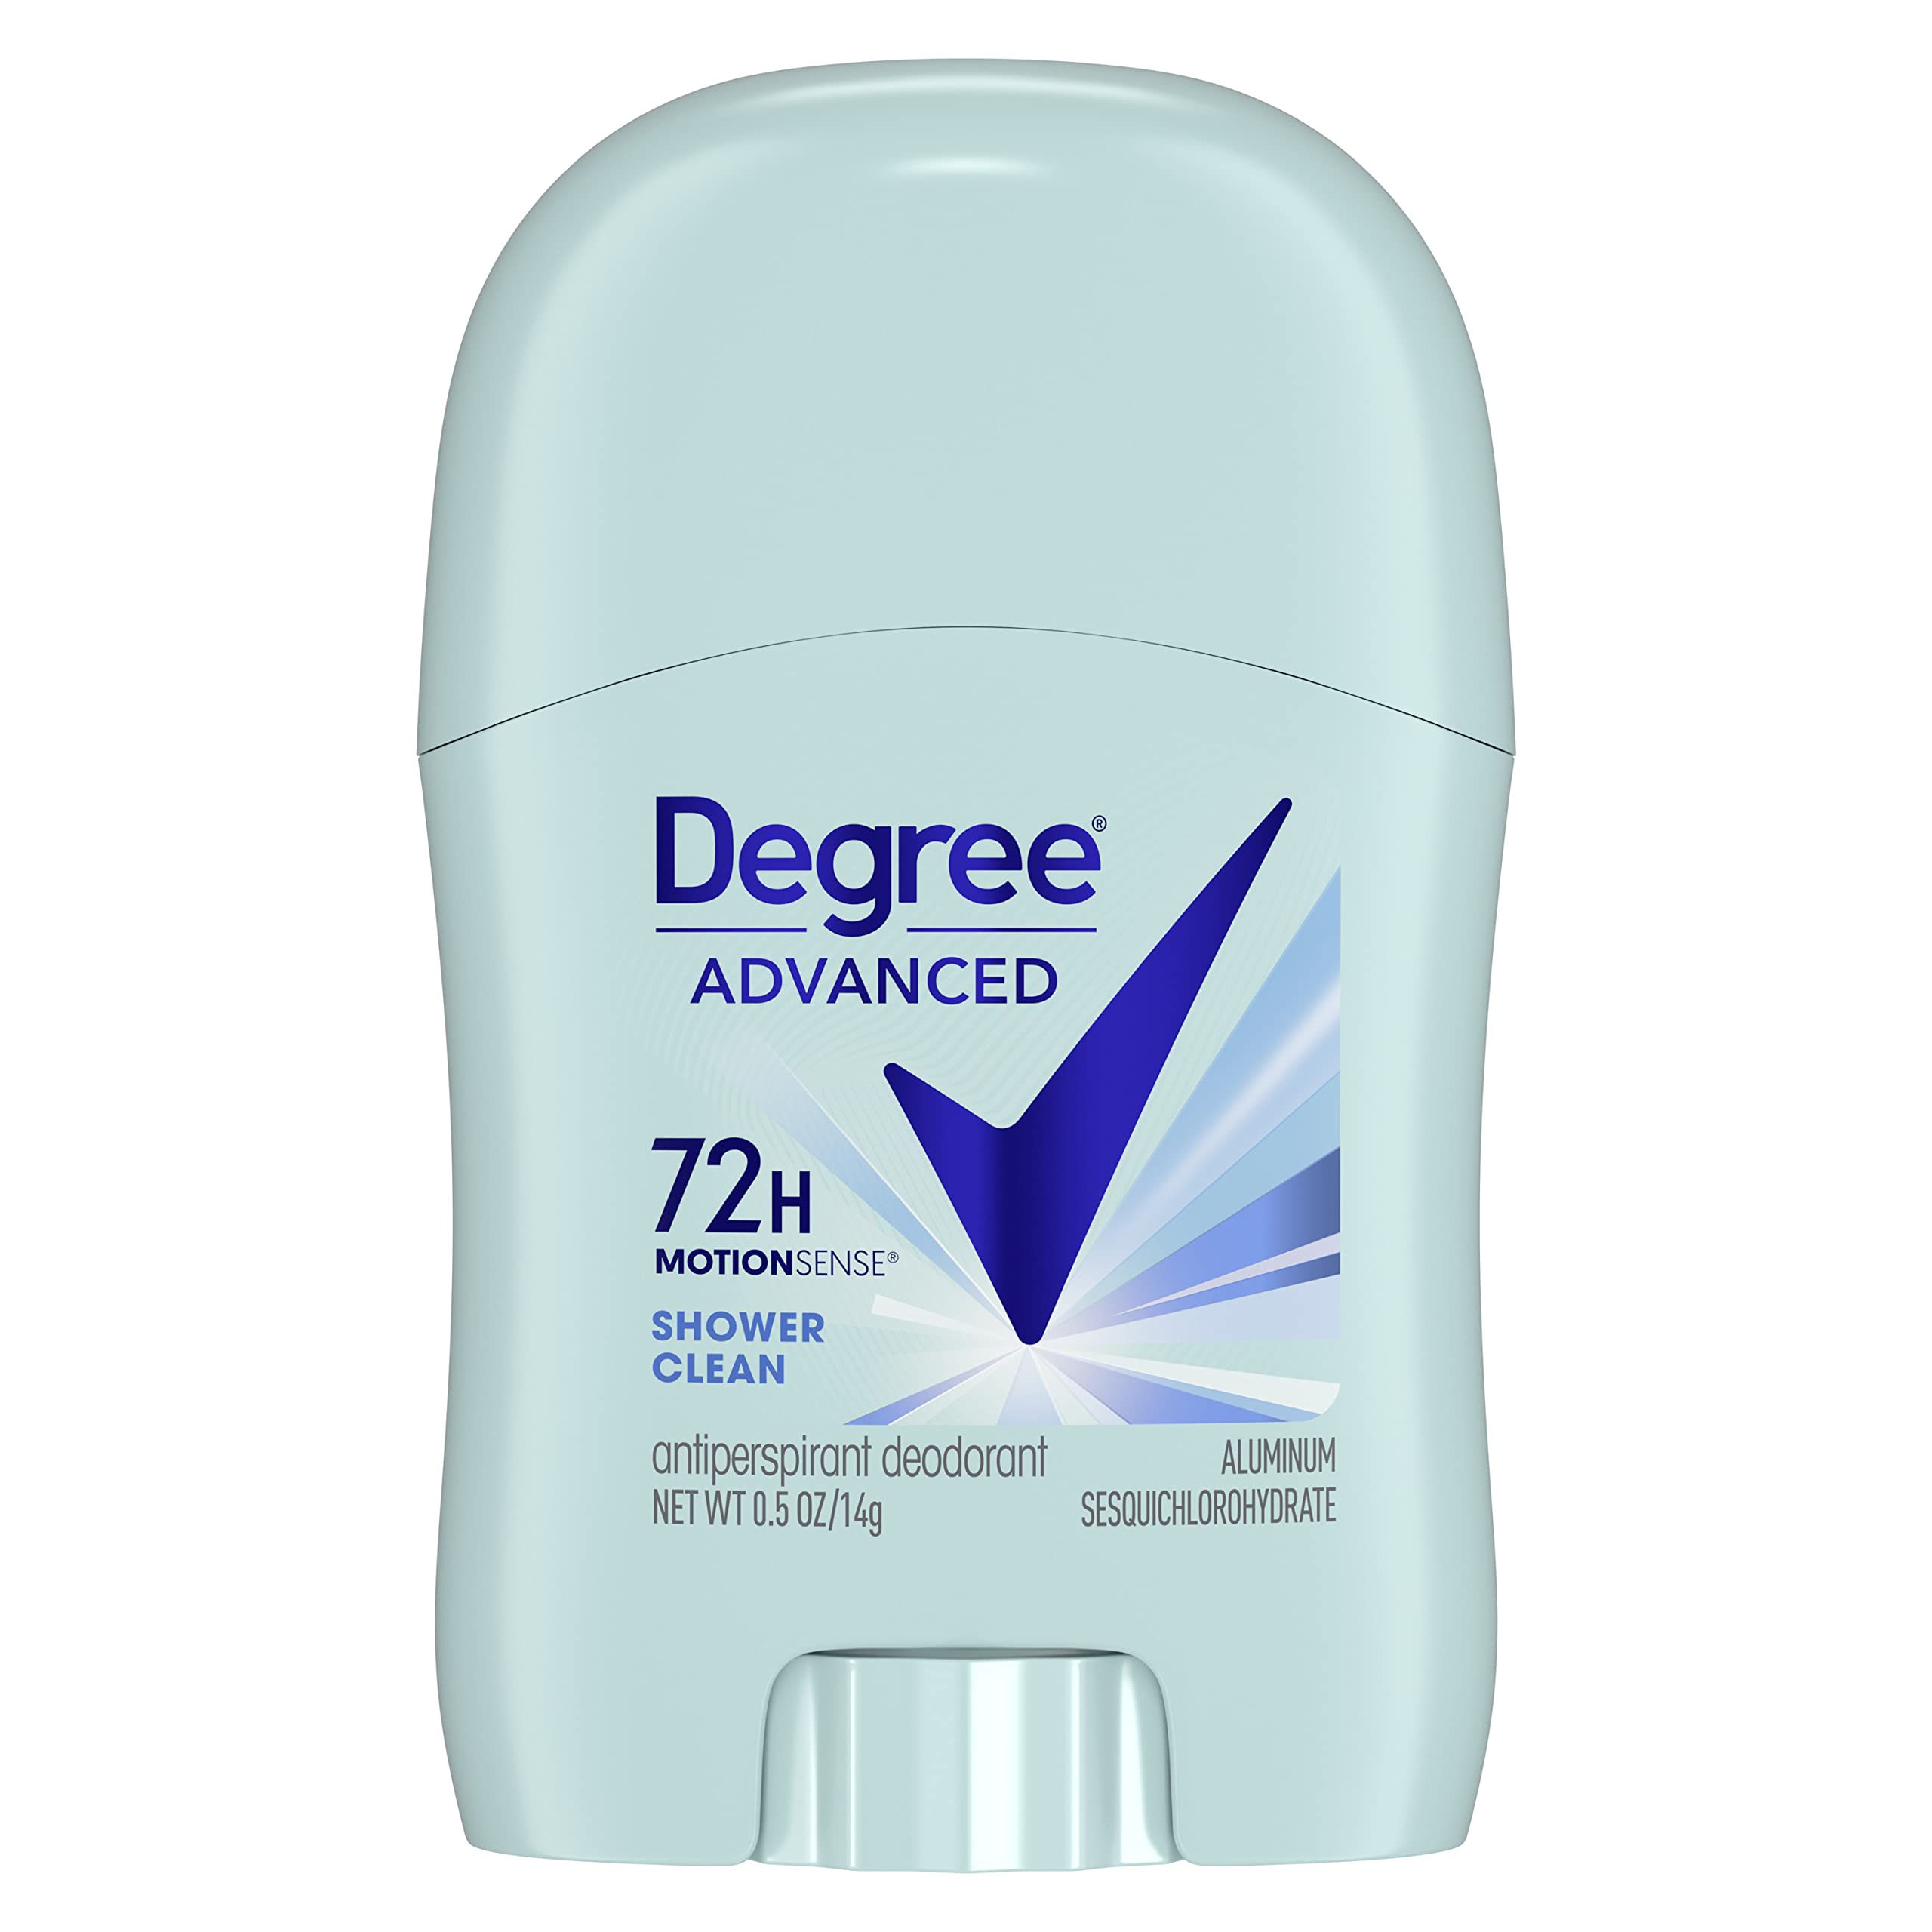 Degree Advanced Antiperspirant Deodorant 72-Hour Sweat & Odor Protection Shower Clean Antiperspirant for Women with MotionSense Technology, 0.5 Ounce (Pack of 36)